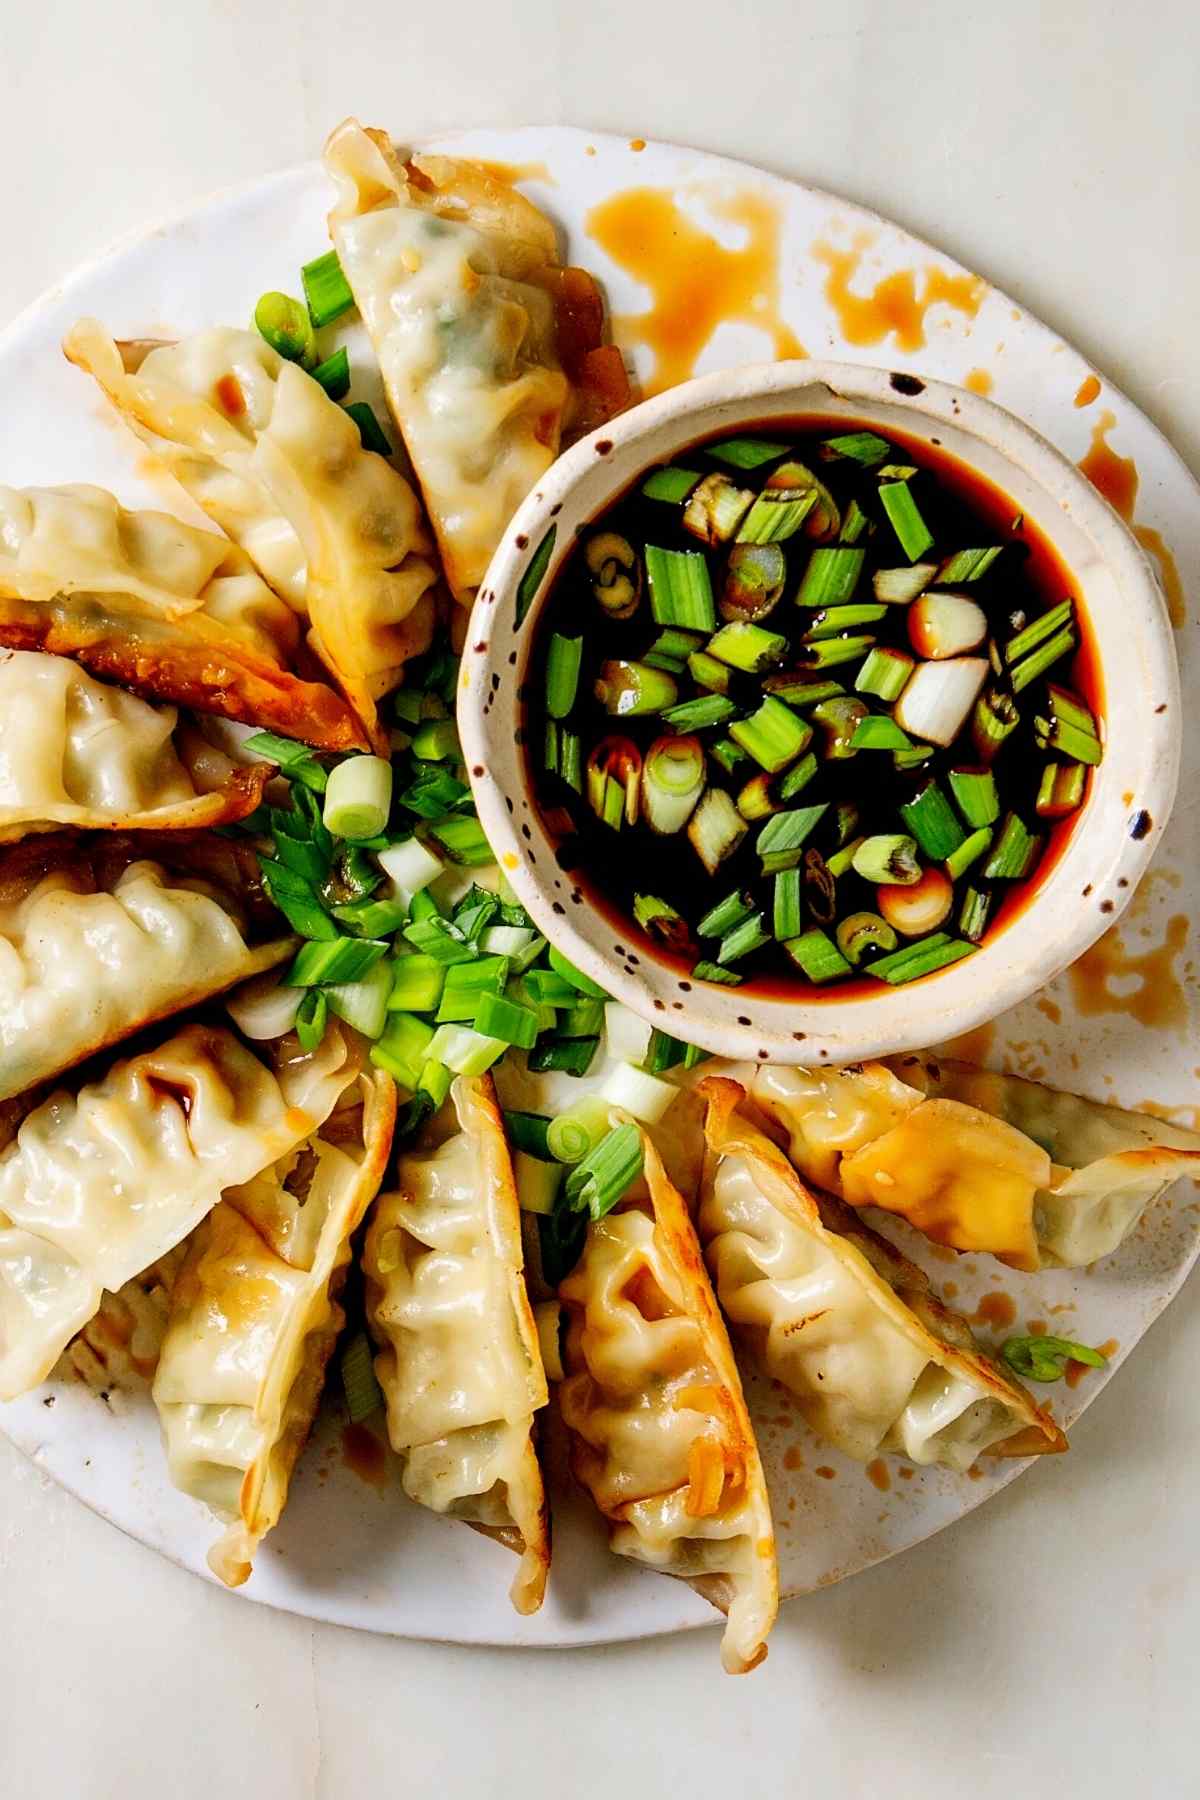 This Easy Soy Ginger Sauce is the perfect dipping sauce or drizzle for wontons, dumplings, spring rolls, or salad. It takes just 5 minutes to prepare and adds a deliciously sweet, salty and savory flavor to any dish.